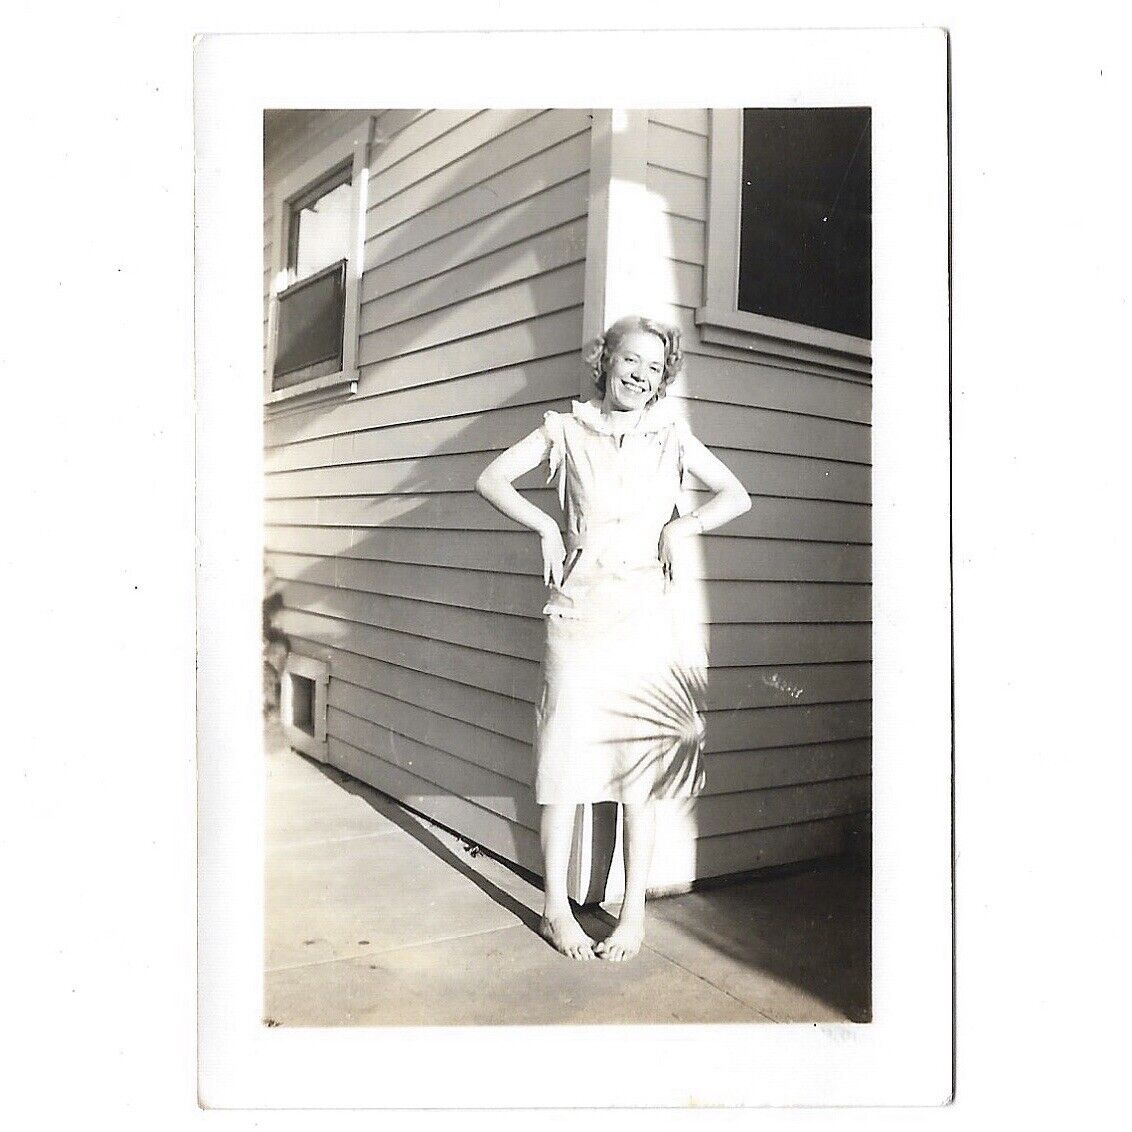 Vintage Photo Beautiful Woman 1940s Pretty Smile Dress Barefoot Against House